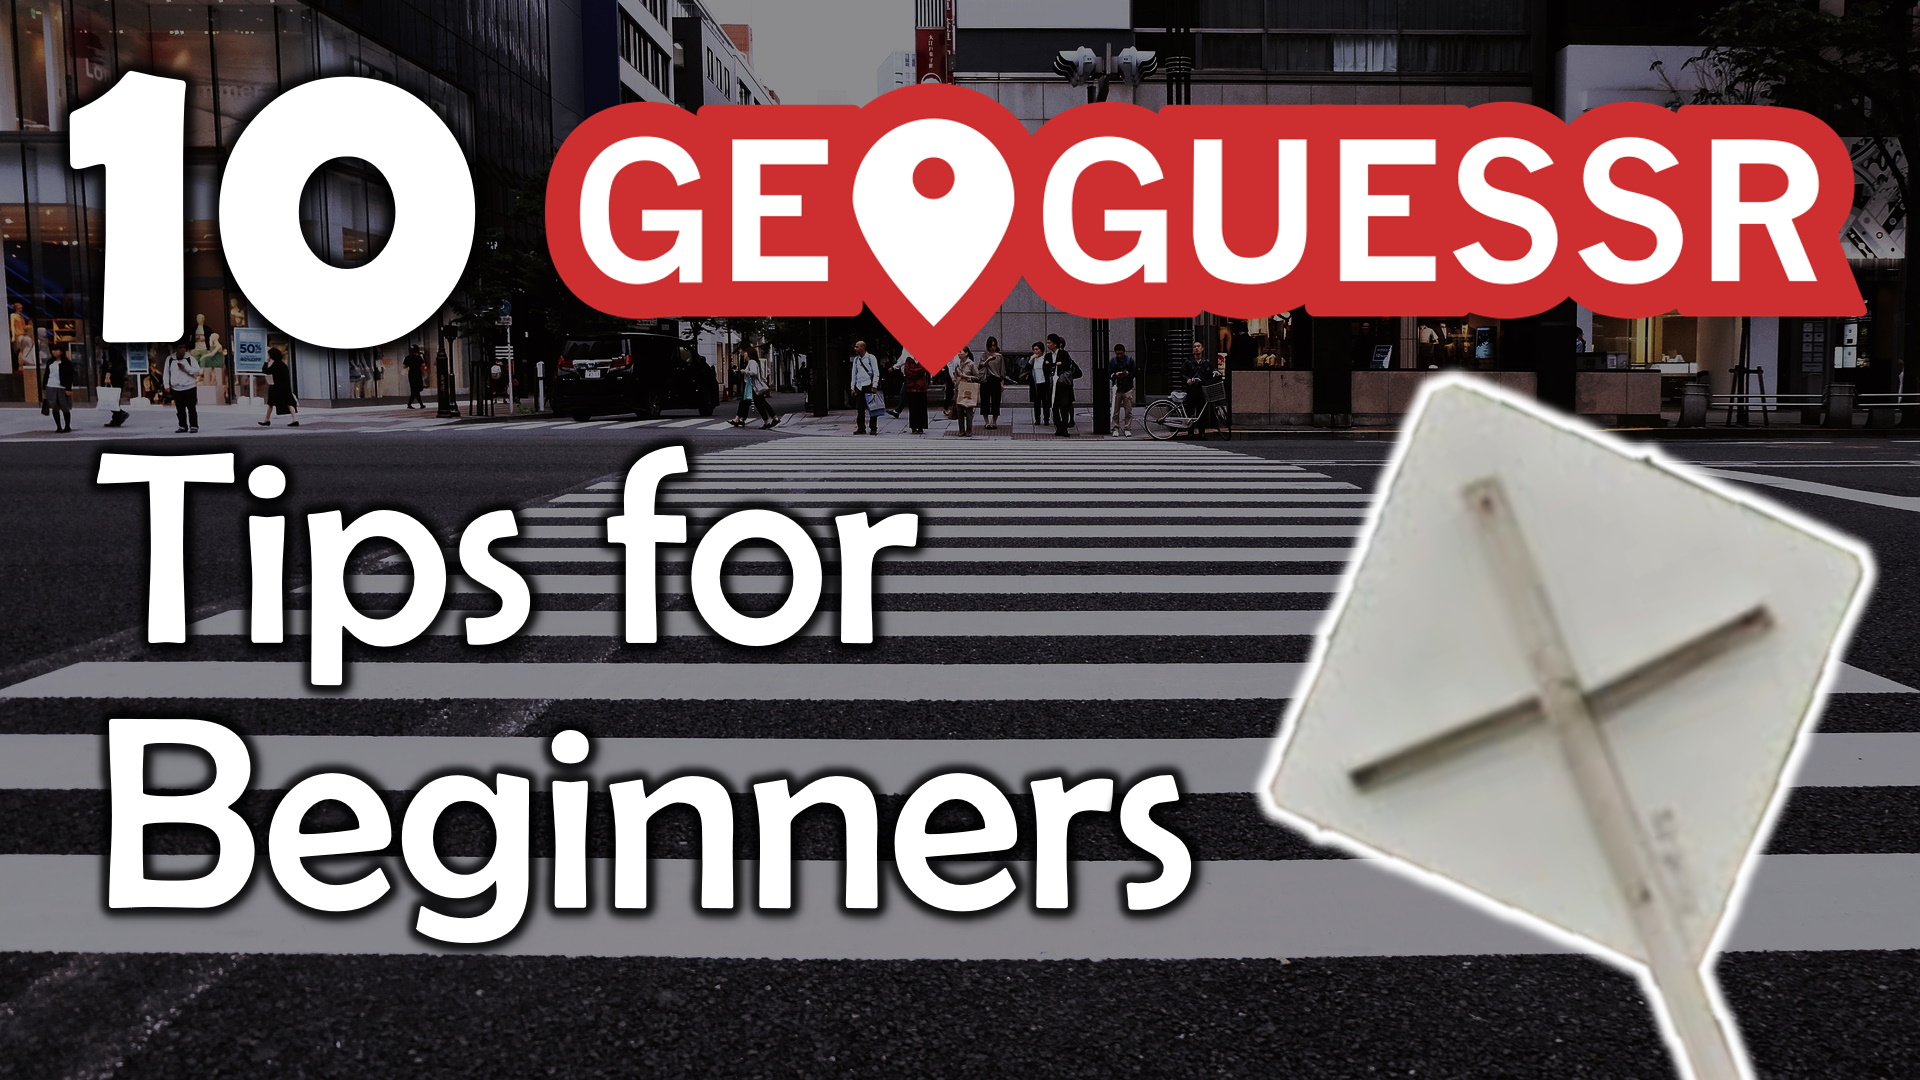 GeoGuessr- The Top Tips, Tricks and Techniques